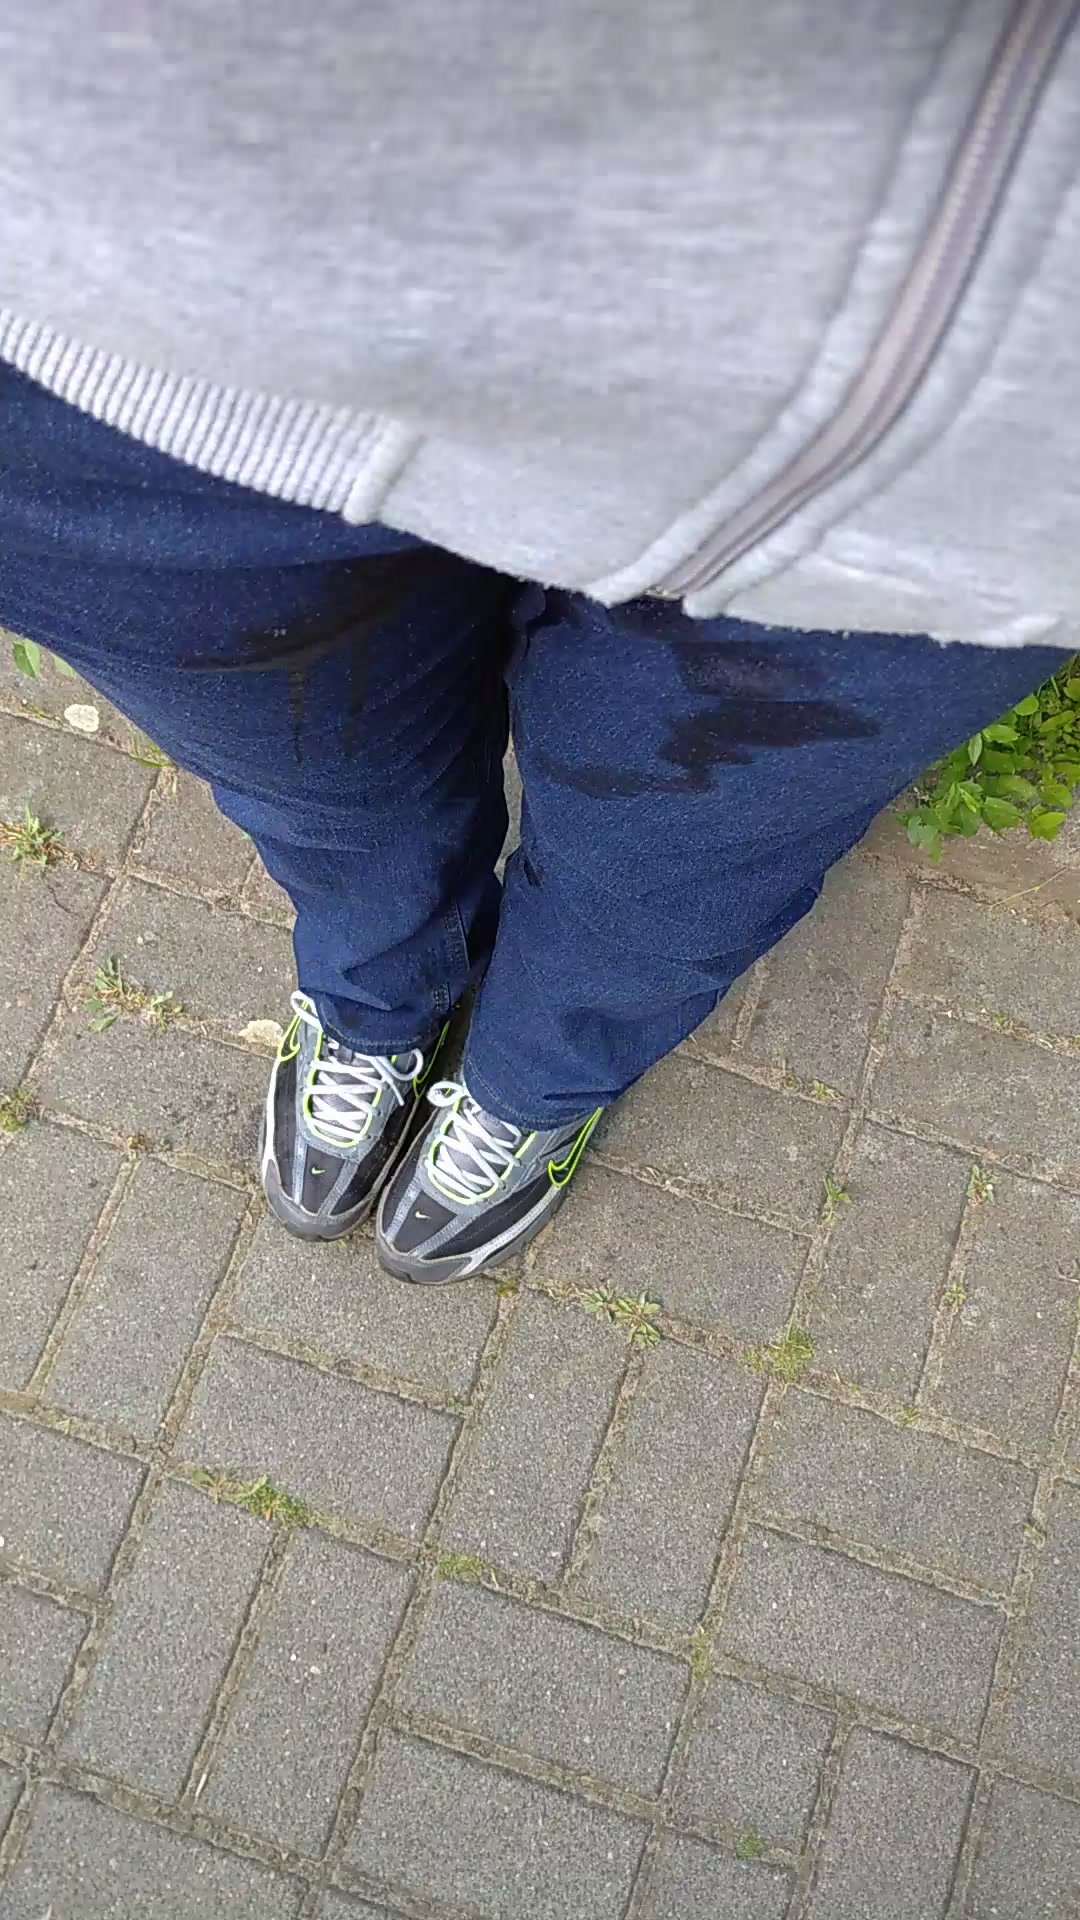 My first public jeans wetting